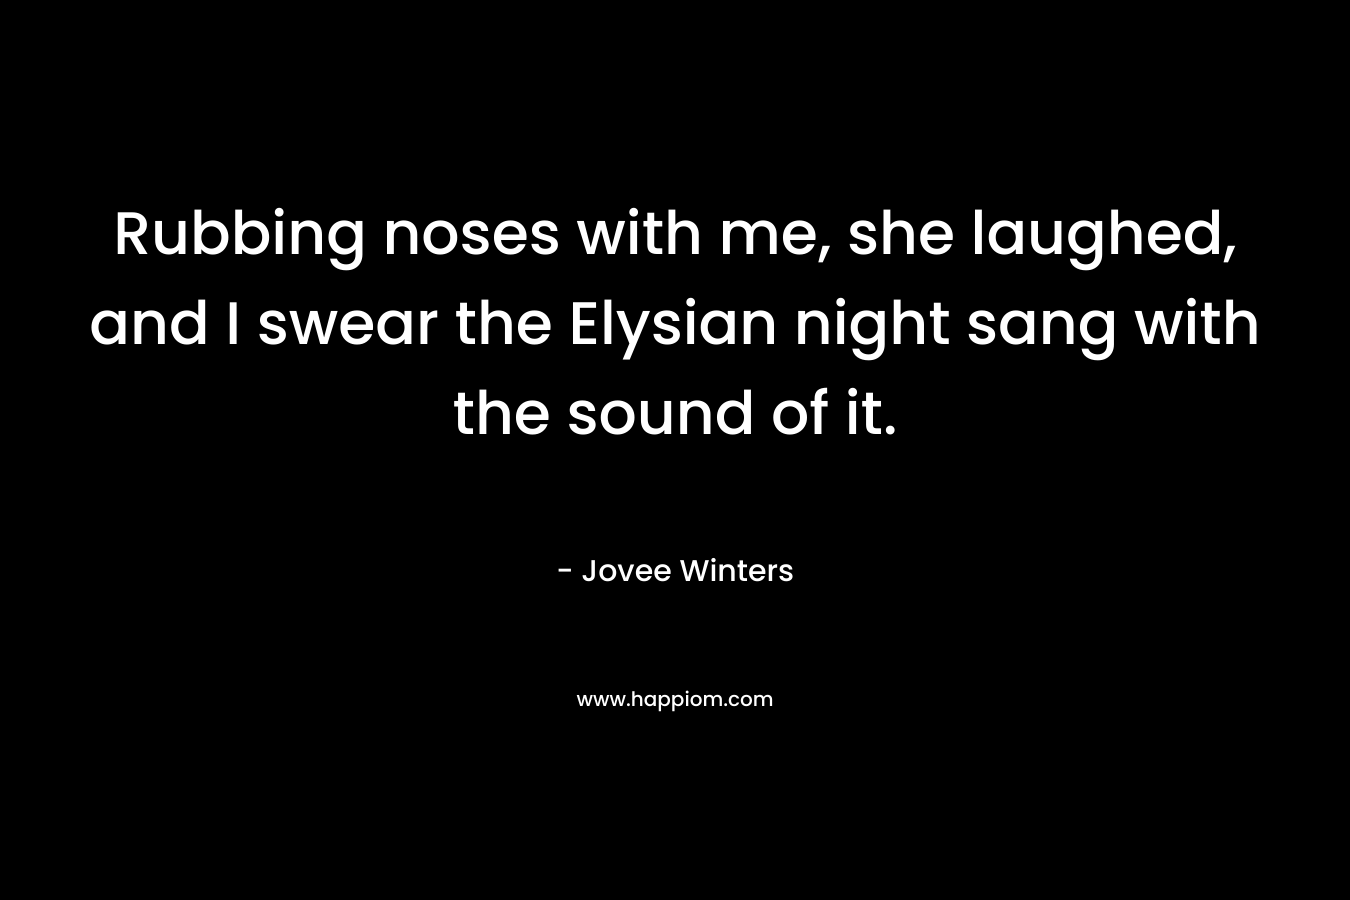 Rubbing noses with me, she laughed, and I swear the Elysian night sang with the sound of it. – Jovee Winters